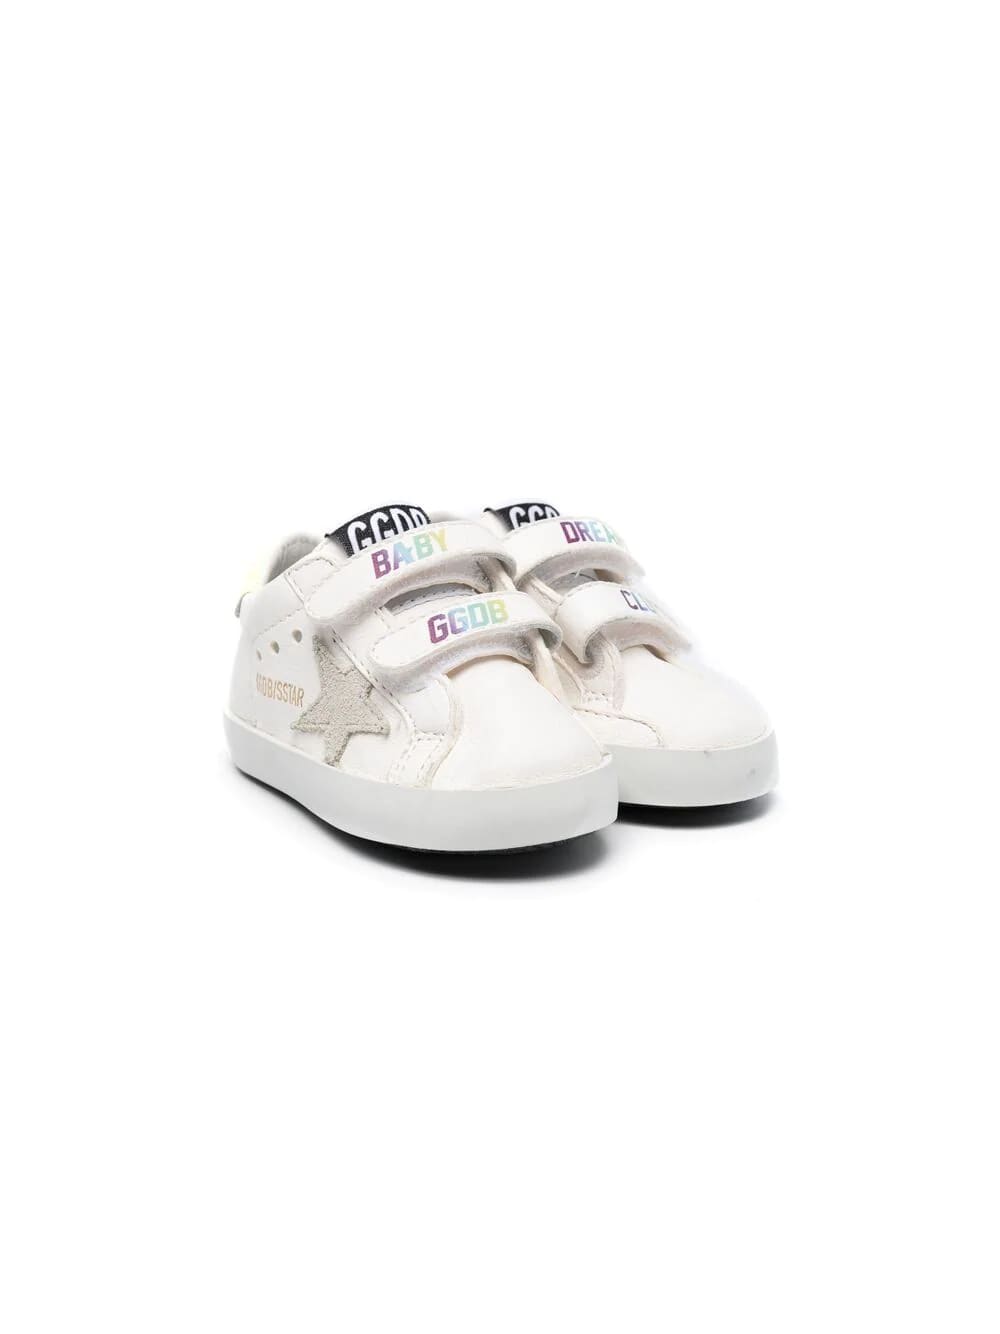 GOLDEN GOOSE NEWBORN WHITE SUPER-STAR SNEAKERS WITH MULTICOLOR BABY GGDB PRINT,GIF00166-F001192 80889